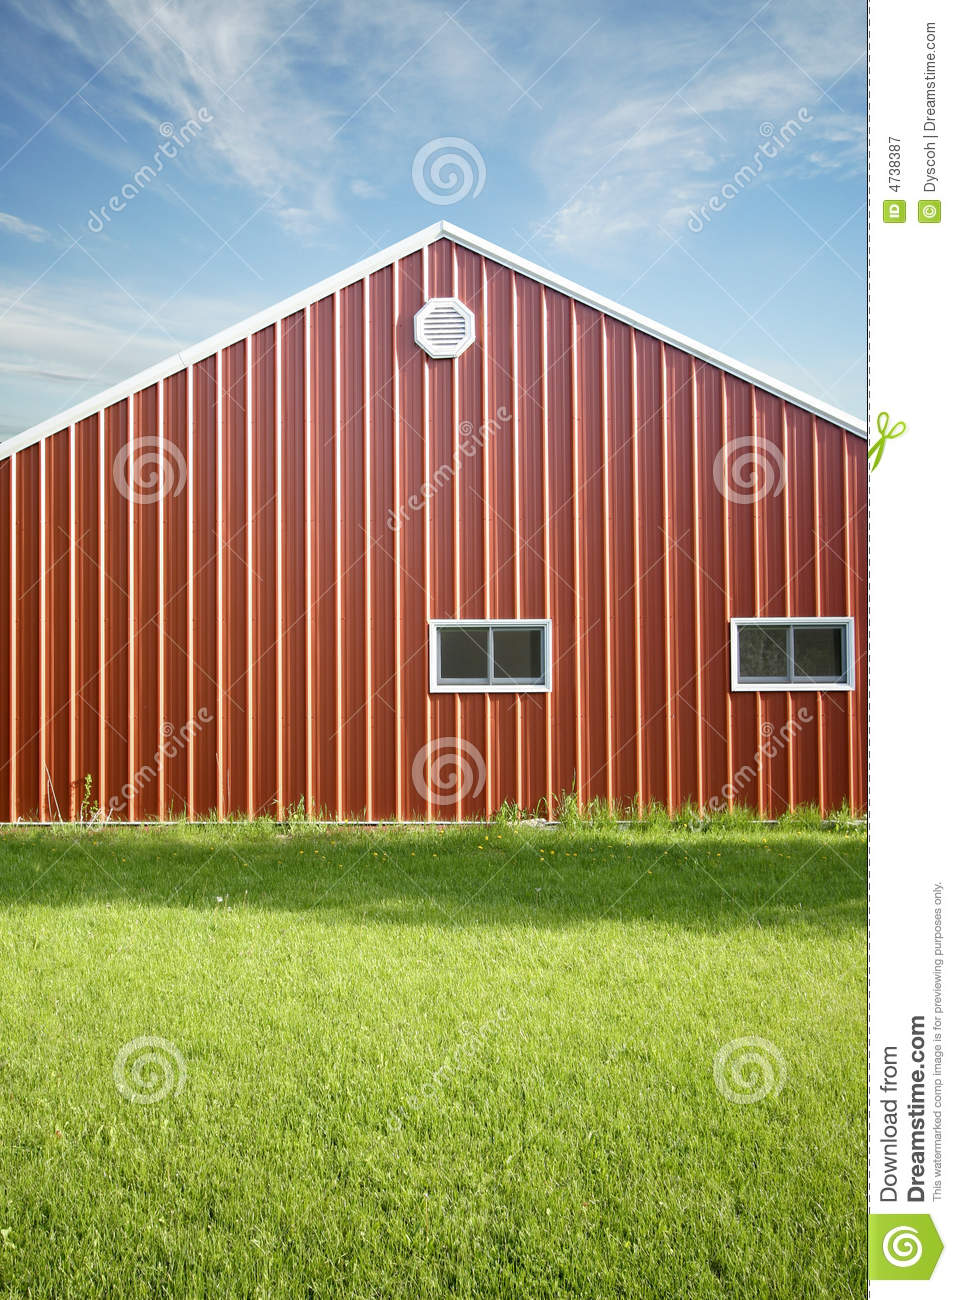 Red Barn With Blue Sky And Gre Royalty Free Stock Photography   Image    